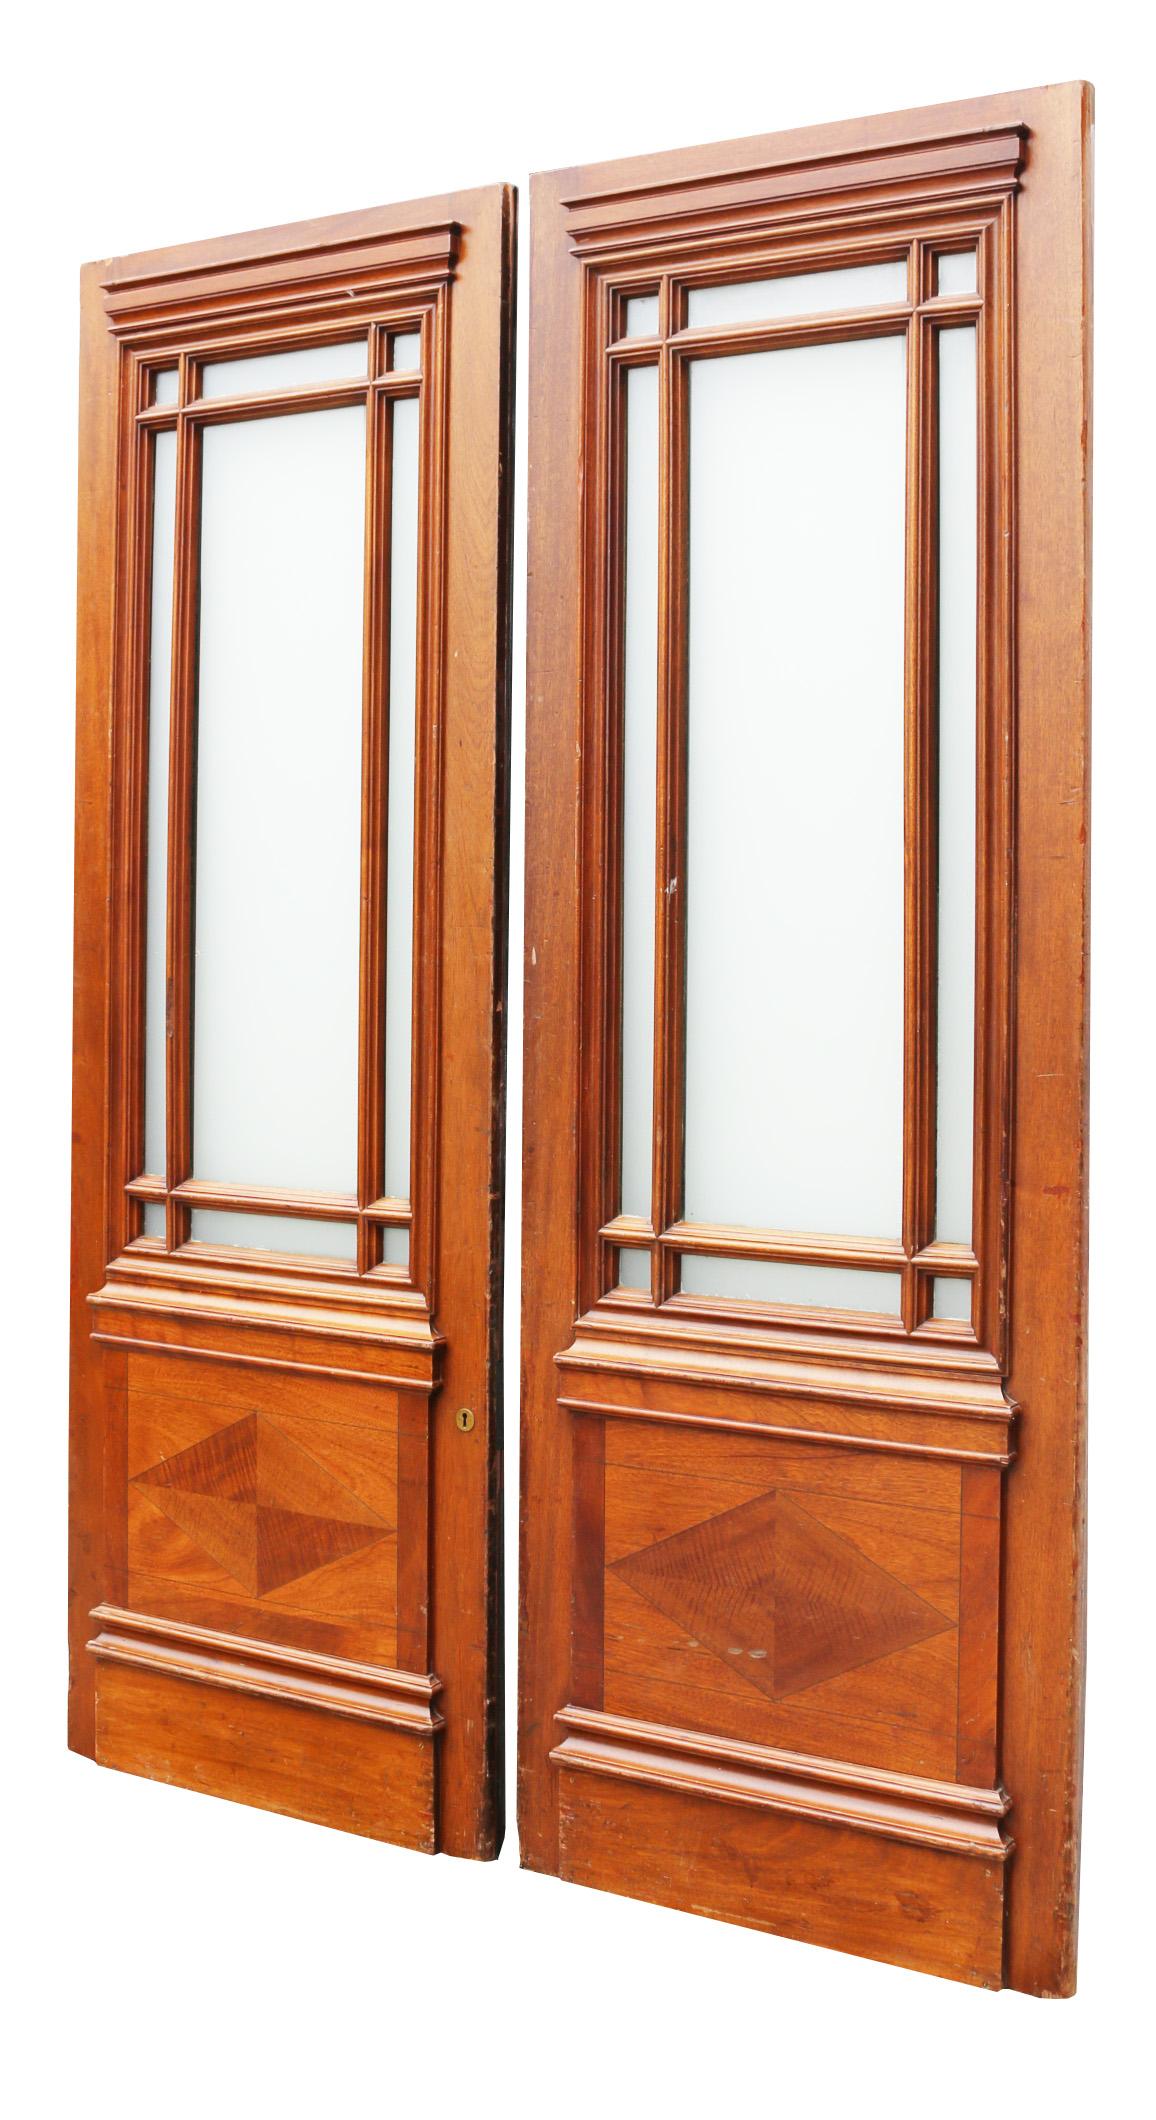 Set of Antique Glazed Mahogany Double Doors In Good Condition For Sale In Wormelow, Herefordshire